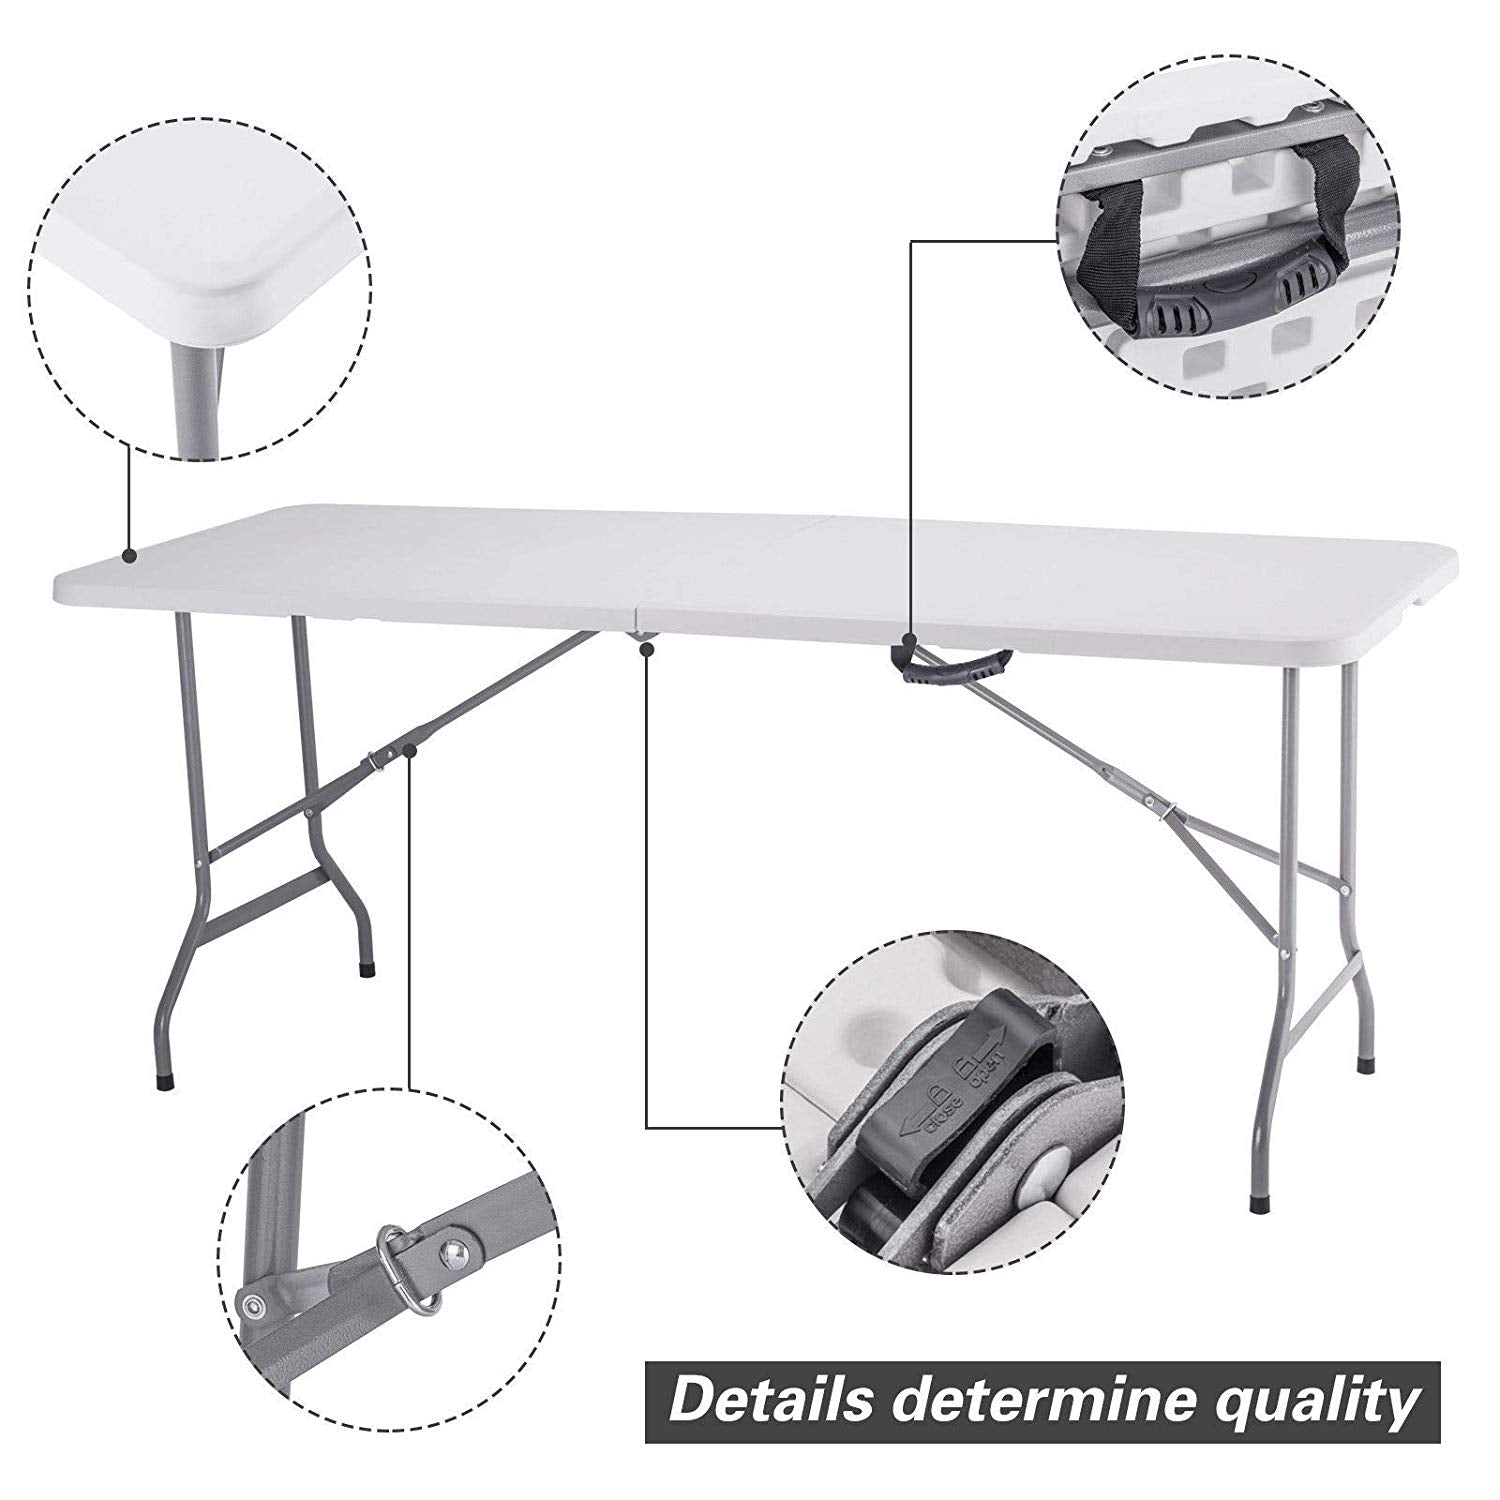 100PCS 4Ft Portable Multipurpose Folding Table Collapsible Picnic Aluminum Adjustable Table White Fold Up Square Desk for Hiking Camping Wedding Dining Party Patio Outdoor BBQ Yard